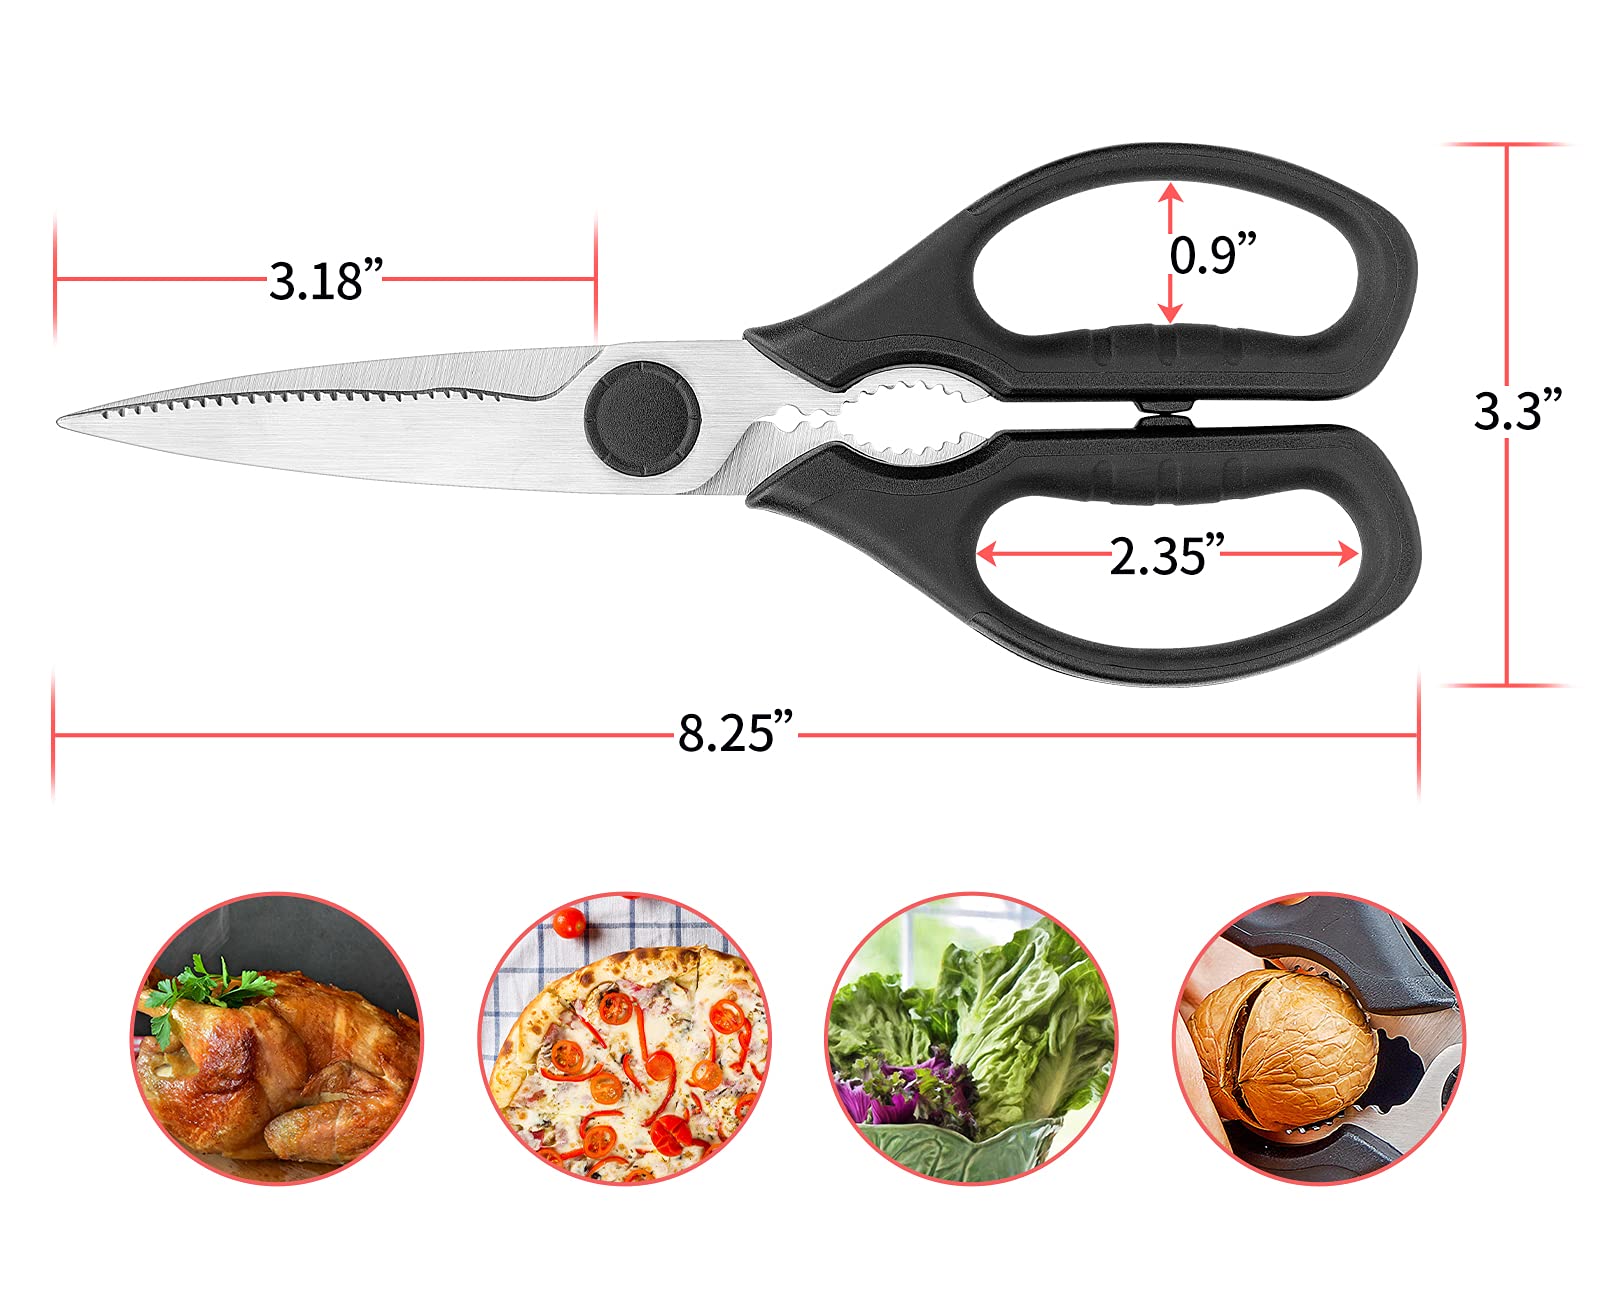 Multifunction Kitchen Scissors 2-Piece Set WELLSTAR, Heavy Duty Food Shears for Chicken Meat Vegetable Fish Herb Poultry Stainless Steel Cooking Scissors with Comfortable Handle Scissors Set (Black)